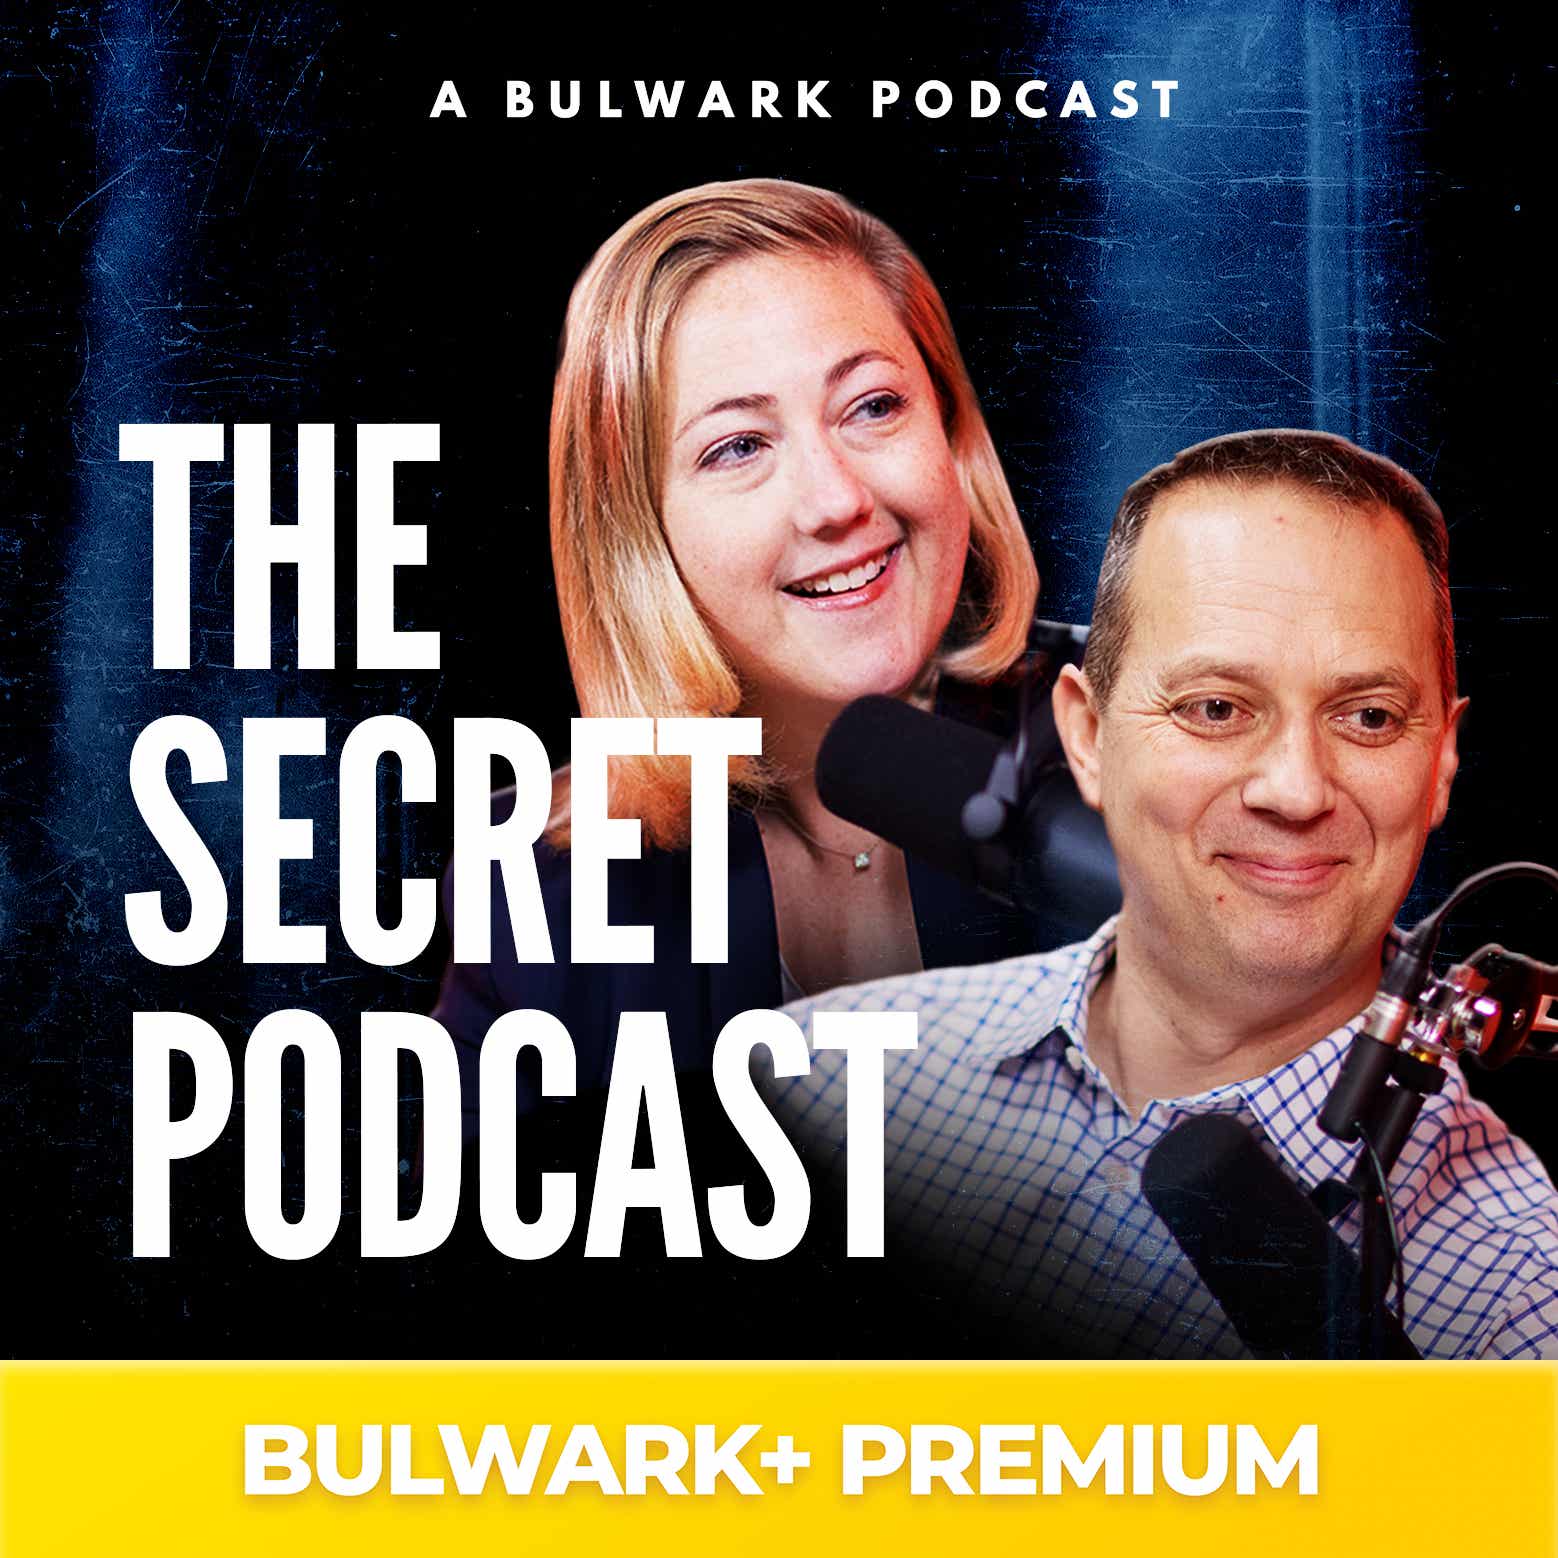 The Secret Podcast (private feed for plg6119@gmail.com)